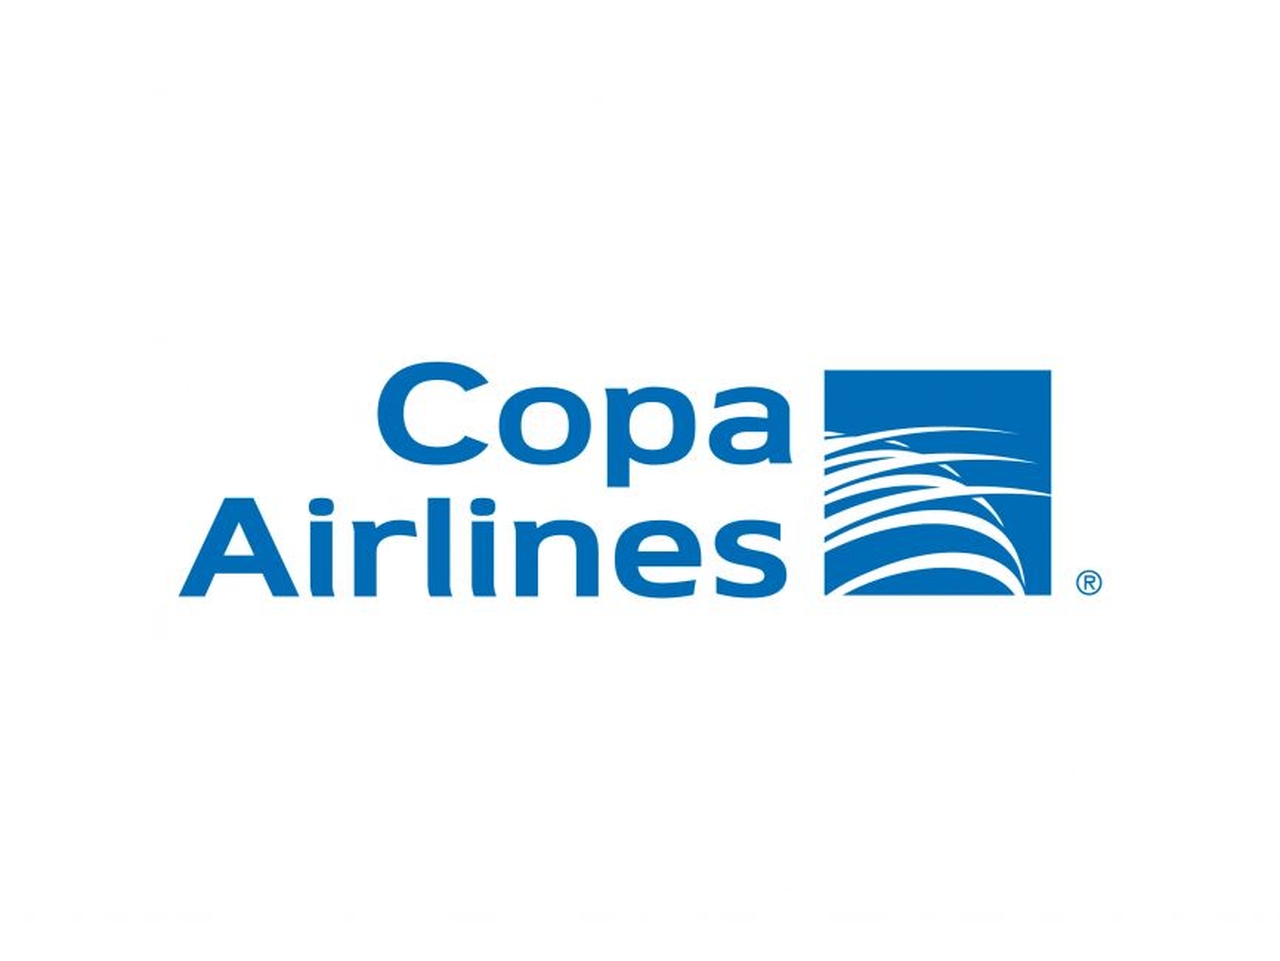 copa-airlines9737_Easy-Resize.com